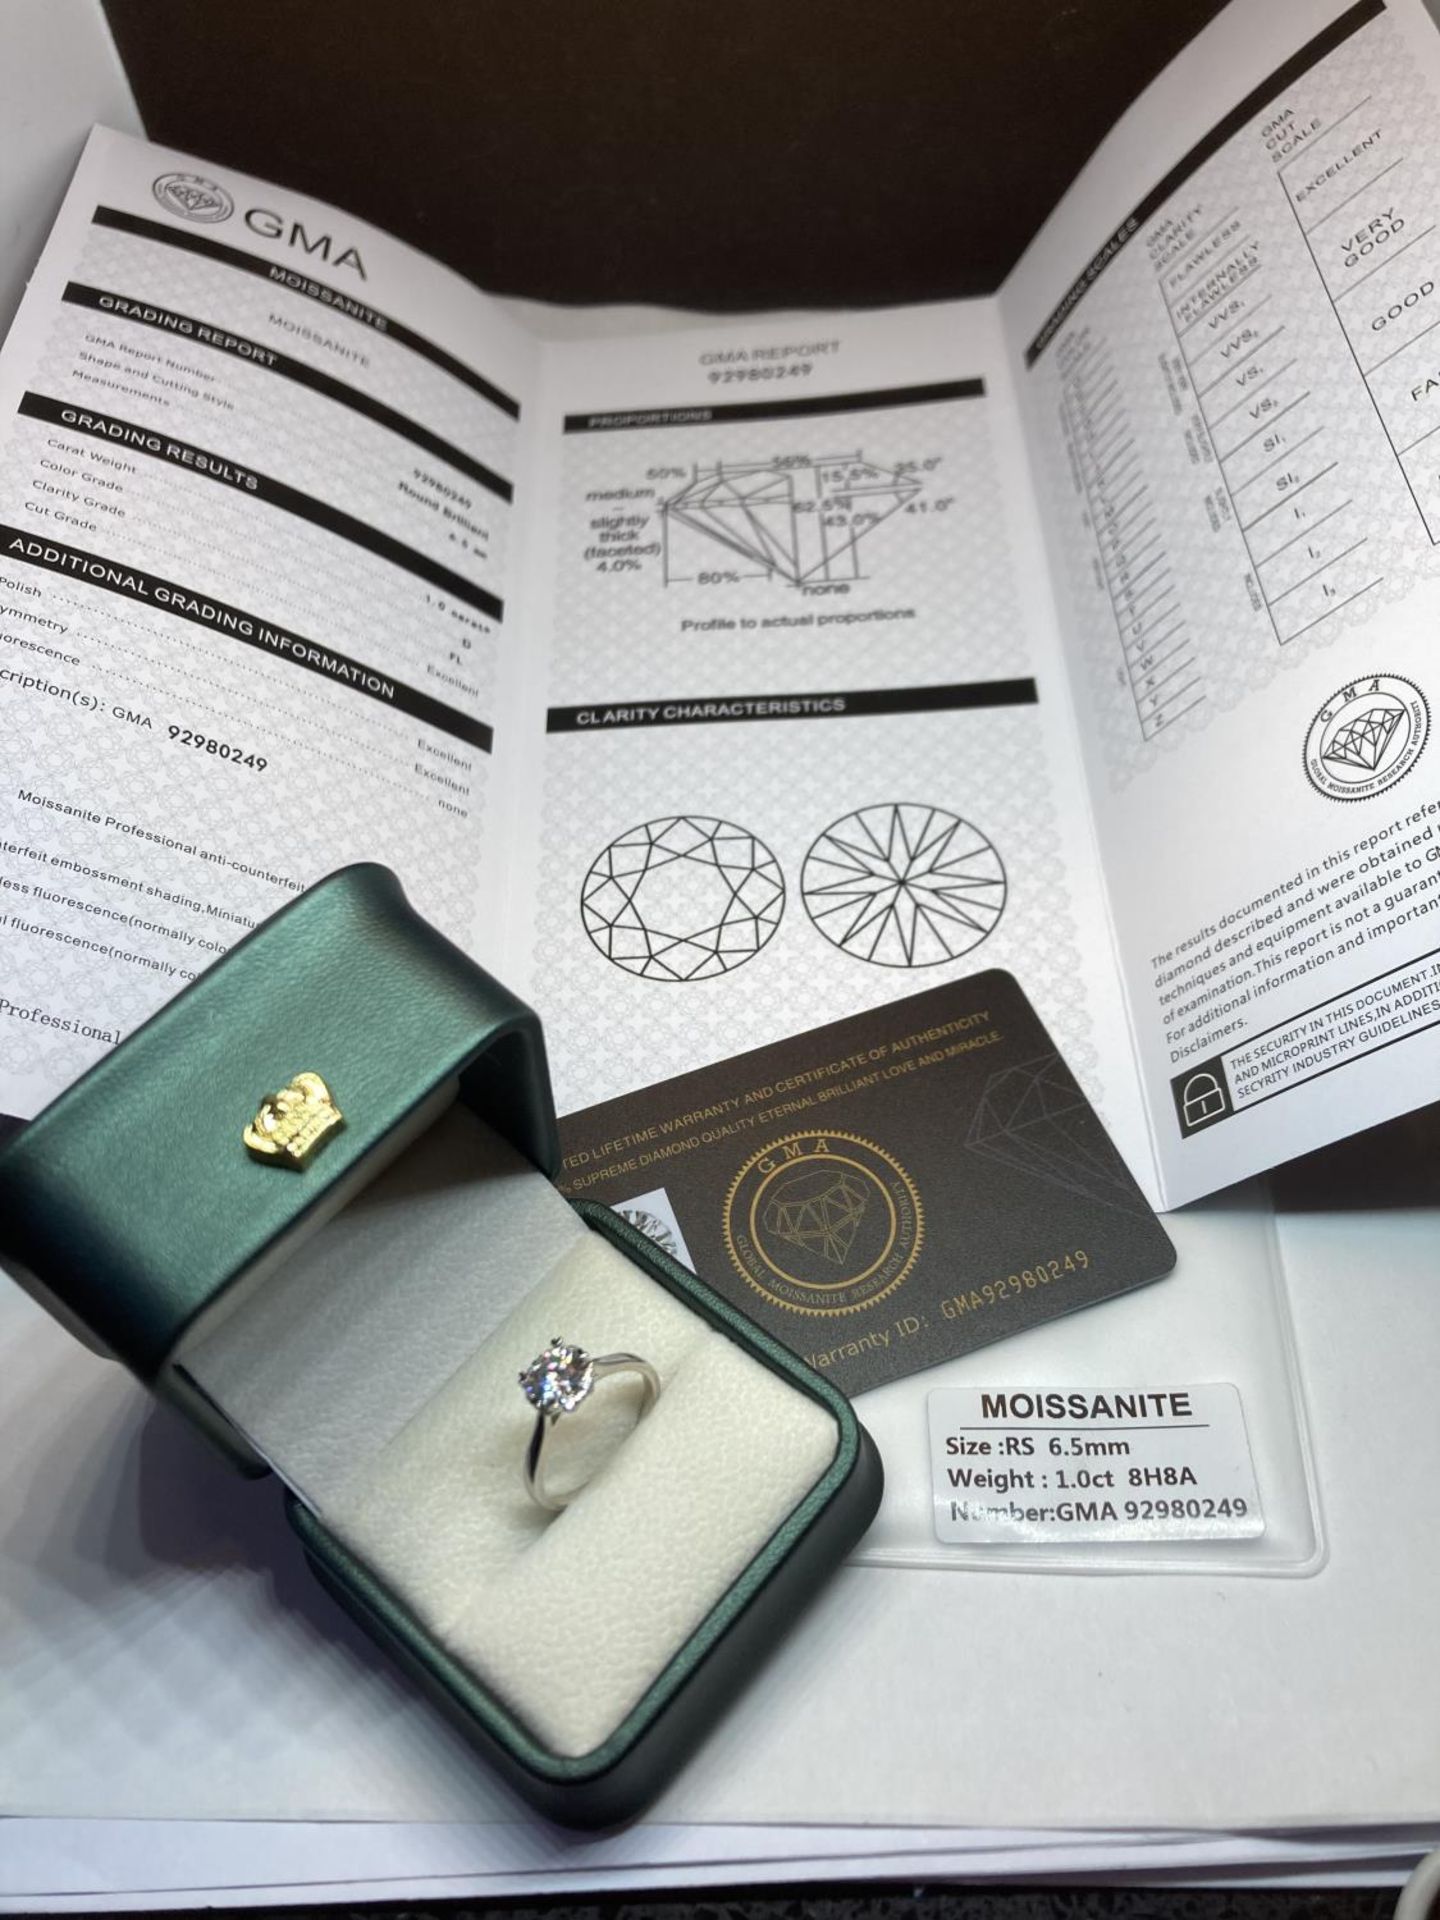 A MARKED 925 ONE CARAT SOLITAIRE MOISSANITE RING, SIZE N/O, WITH PRESENTATION BOX, AND GMA